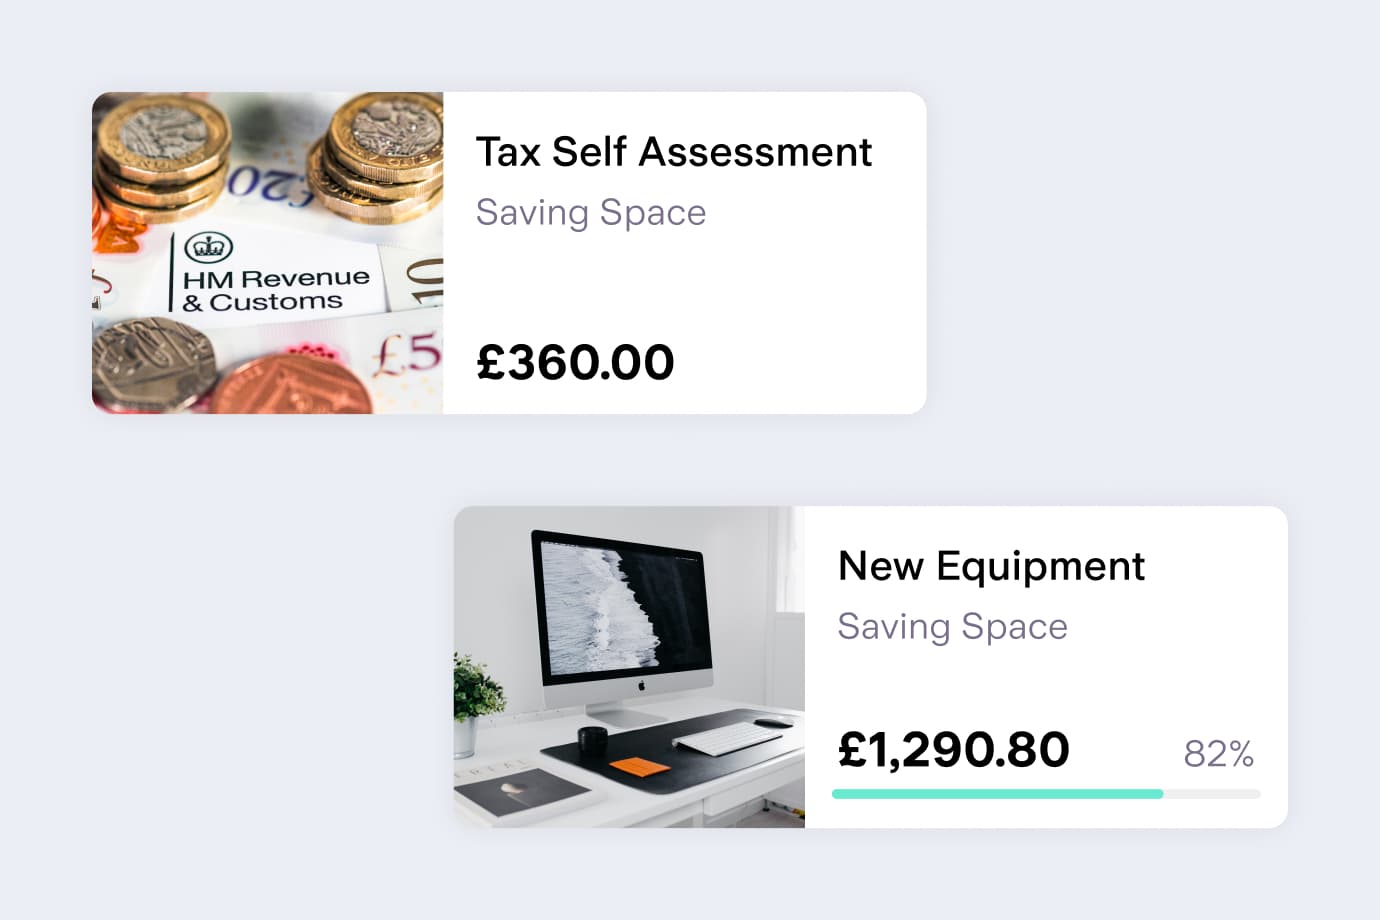 Two Saving Spaces showing goals for Tax Self Assessment and New Equipment